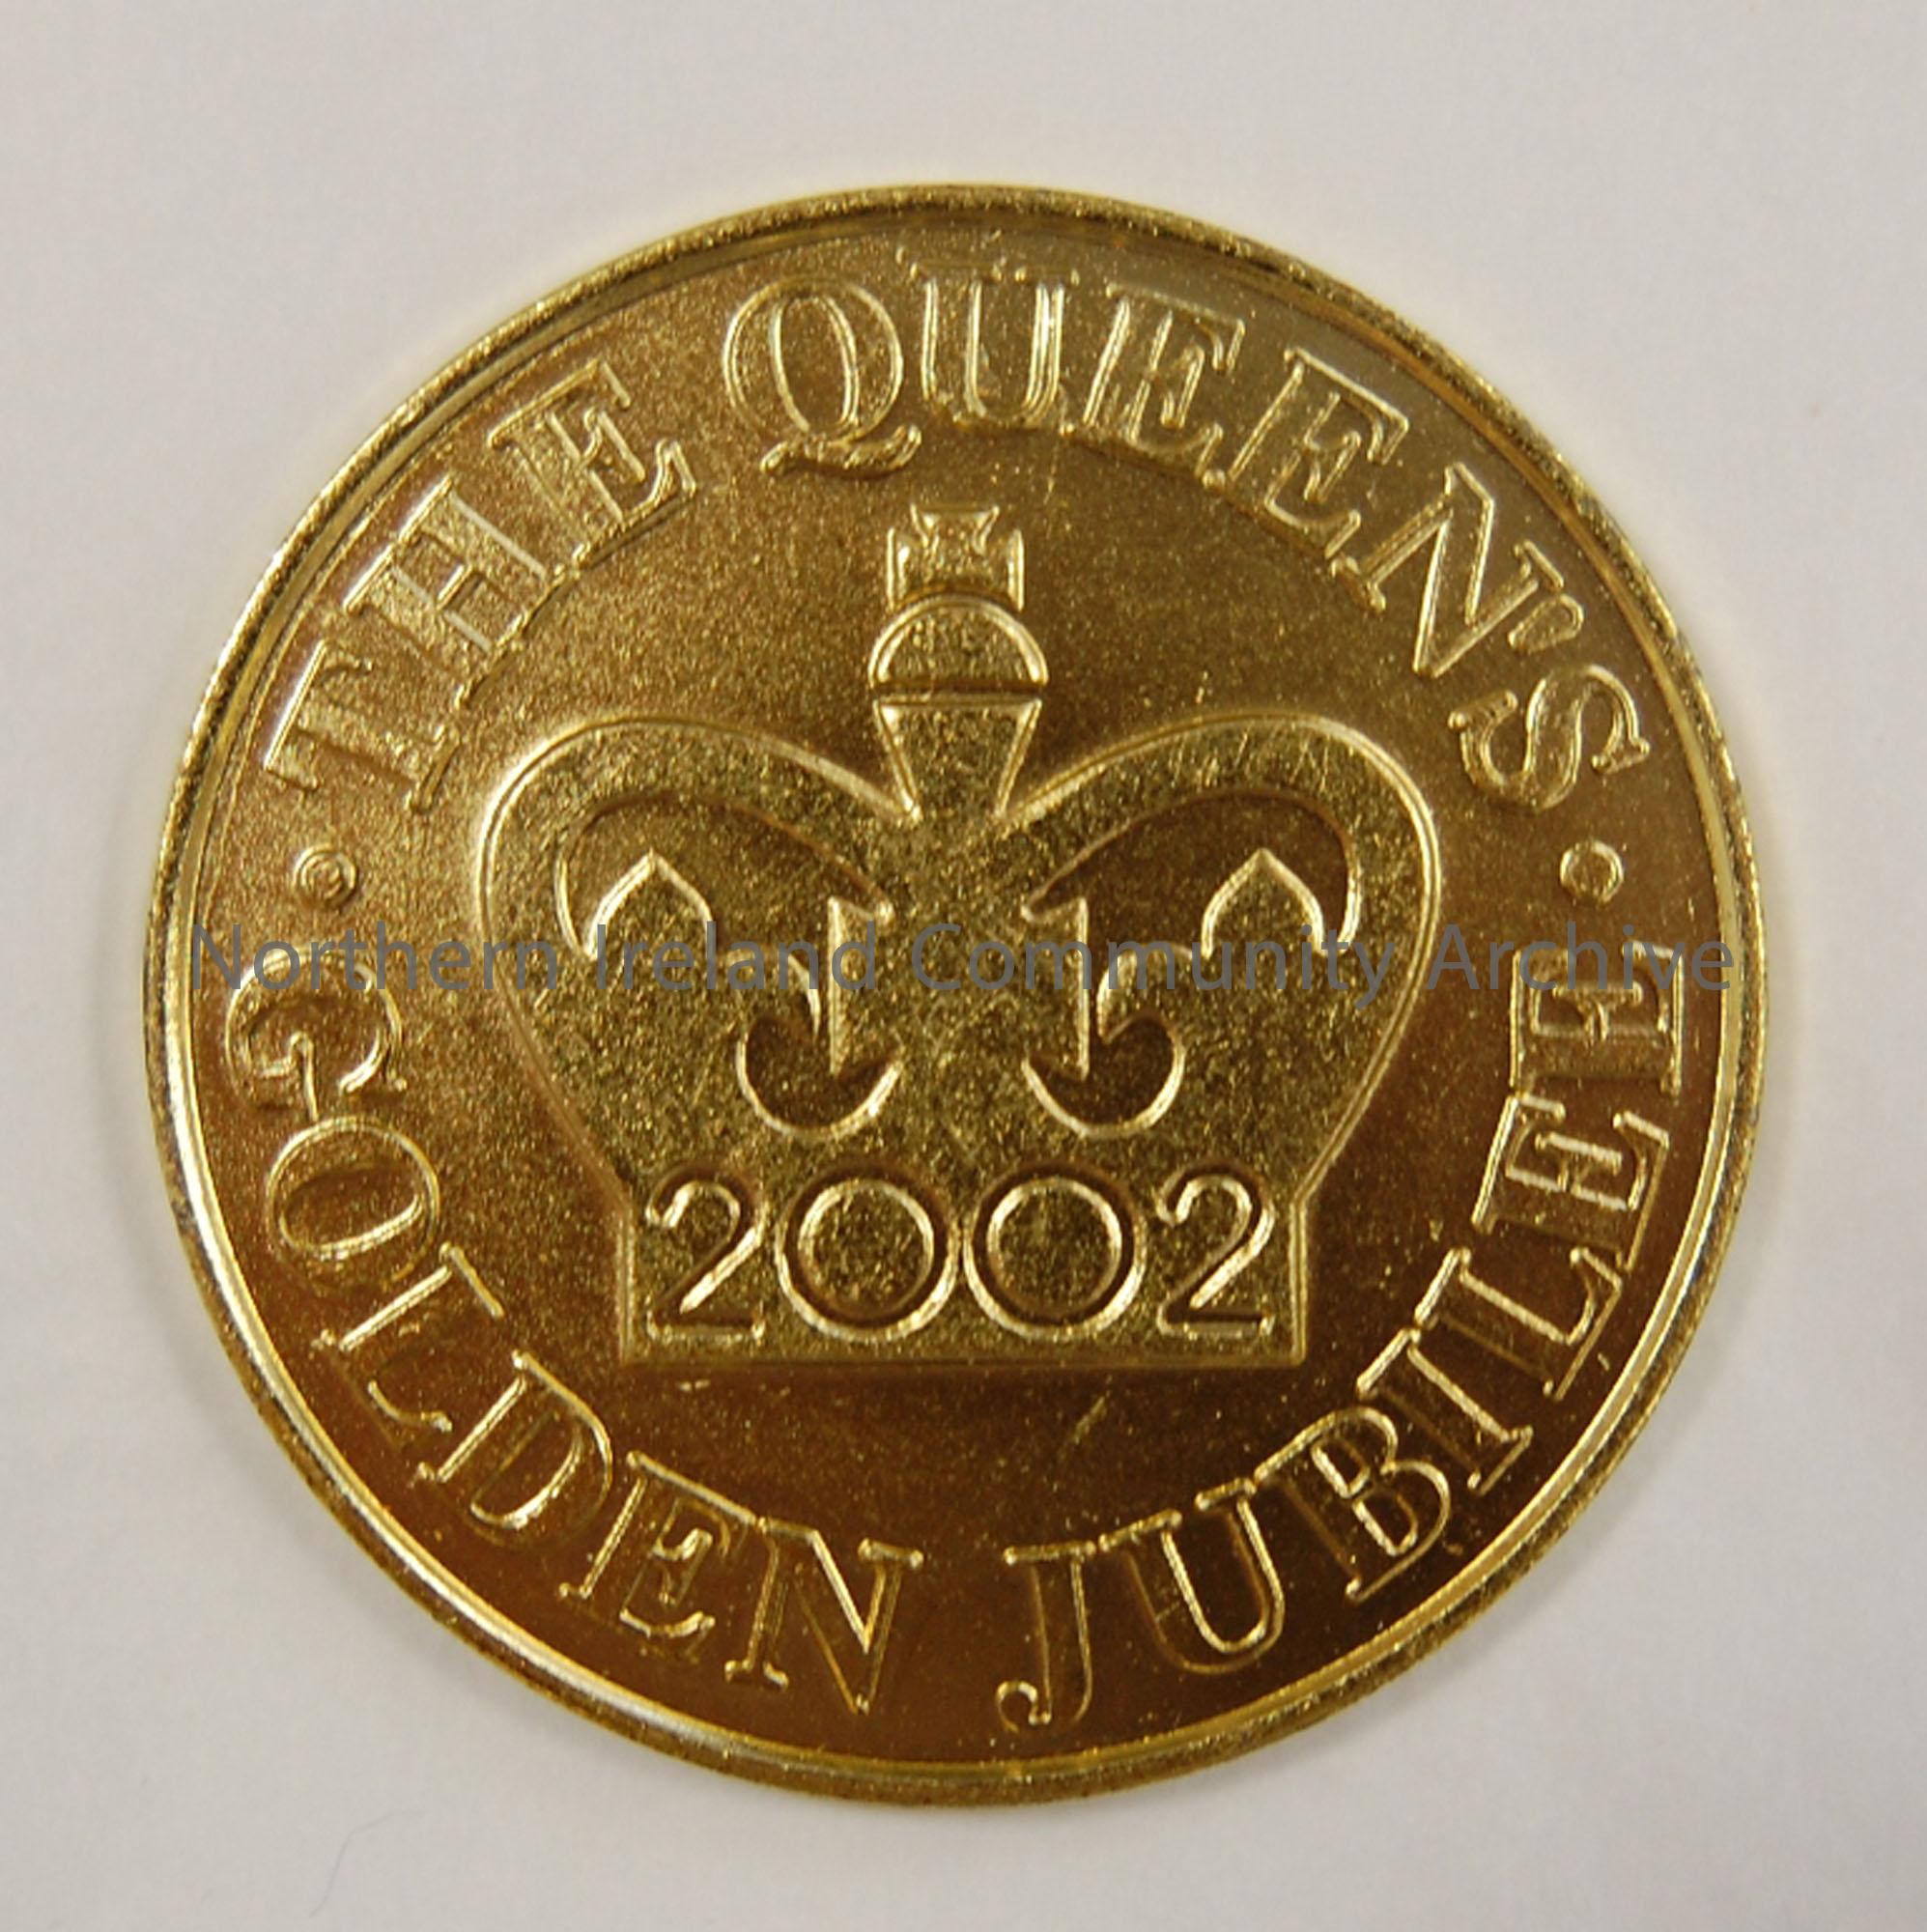 Three Queen Golden Jubilee coins in original box with plaque inside saying Ballymoney Borough Council.